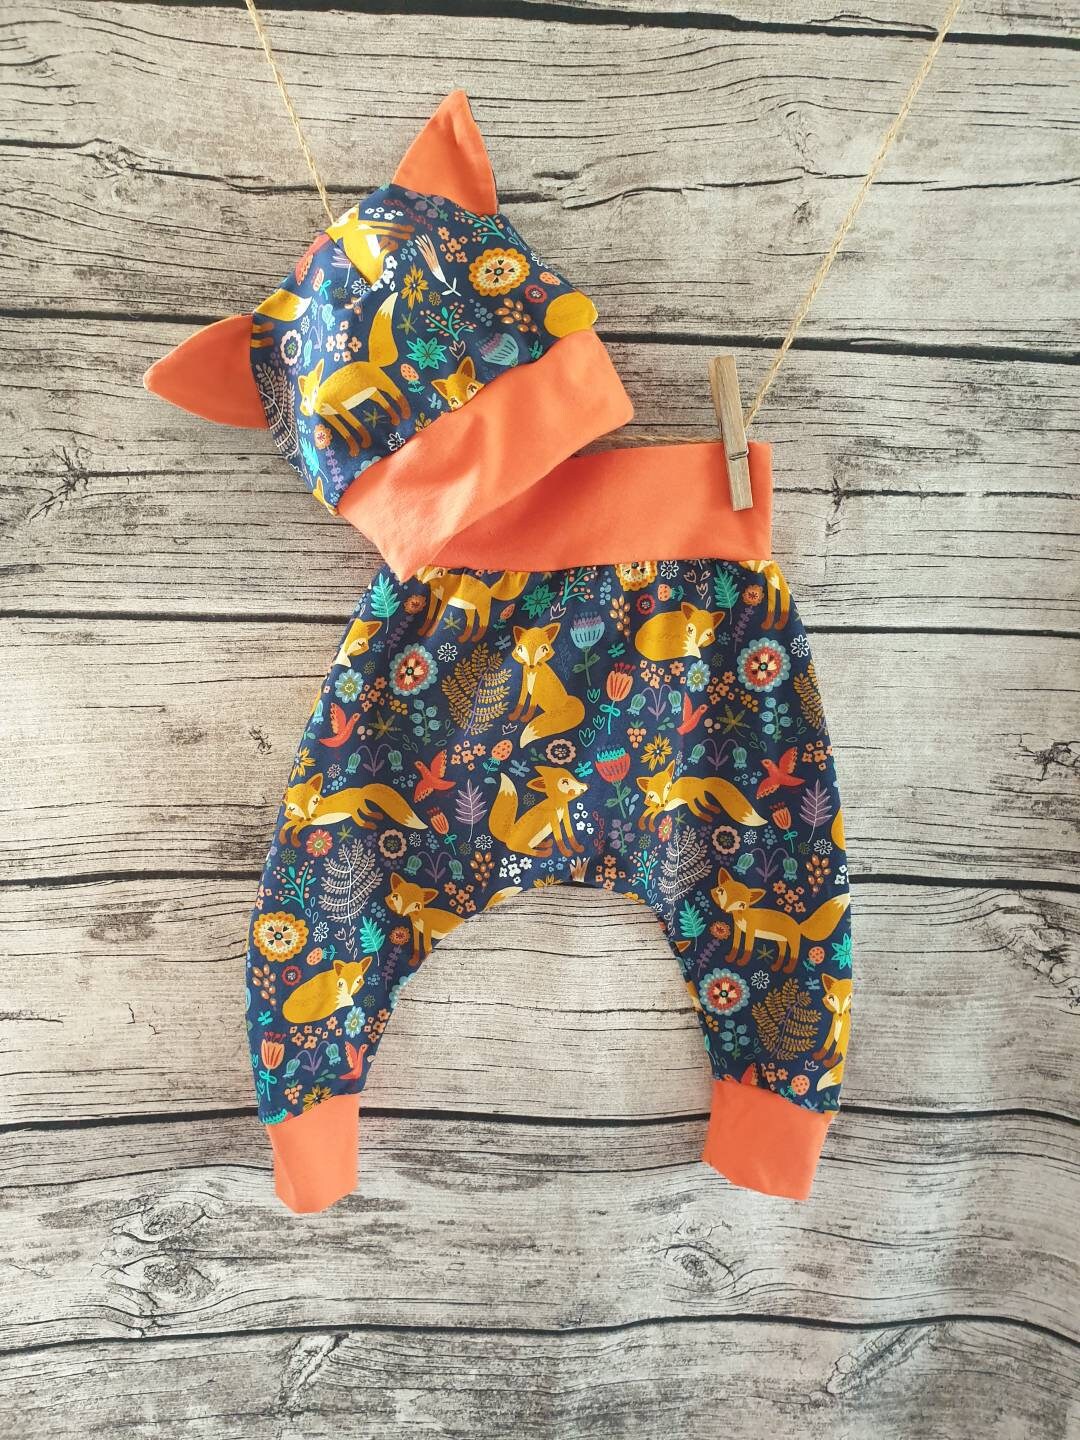 Fox coming home outfit cloth diaper baby shower gift hat and | Etsy